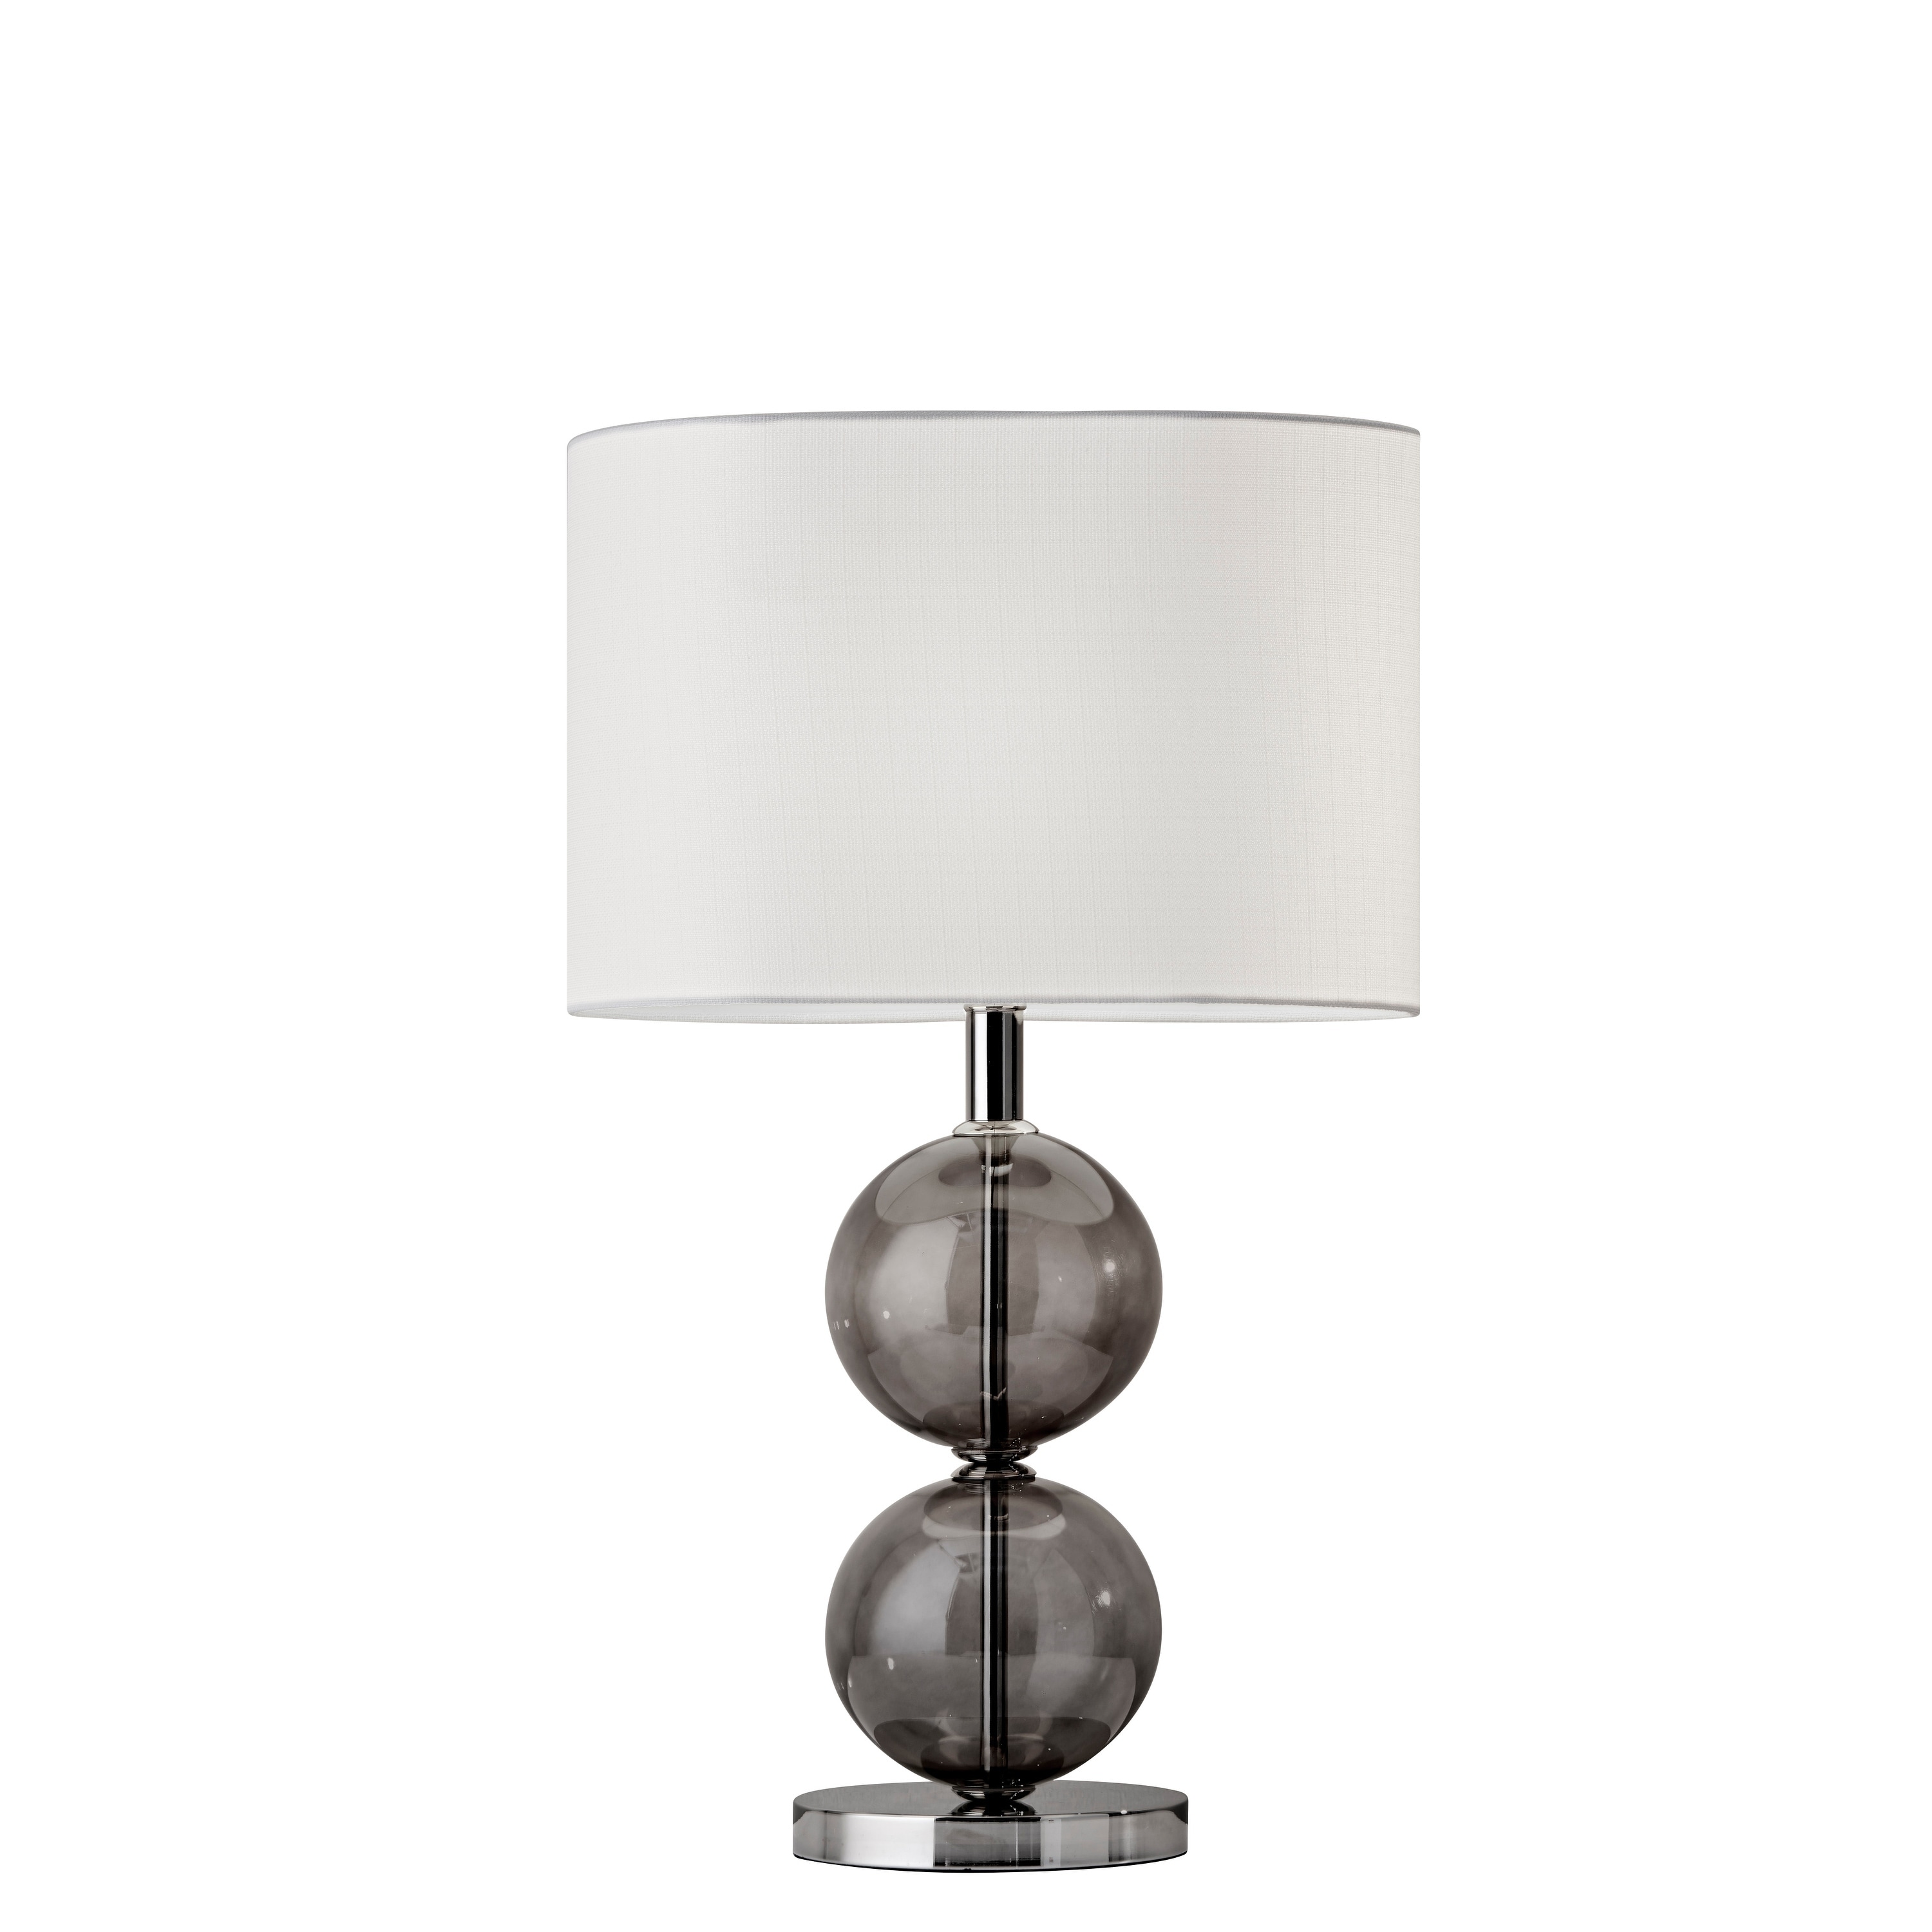 Adesso Donna Tall Table Lamp Overstock 21121255